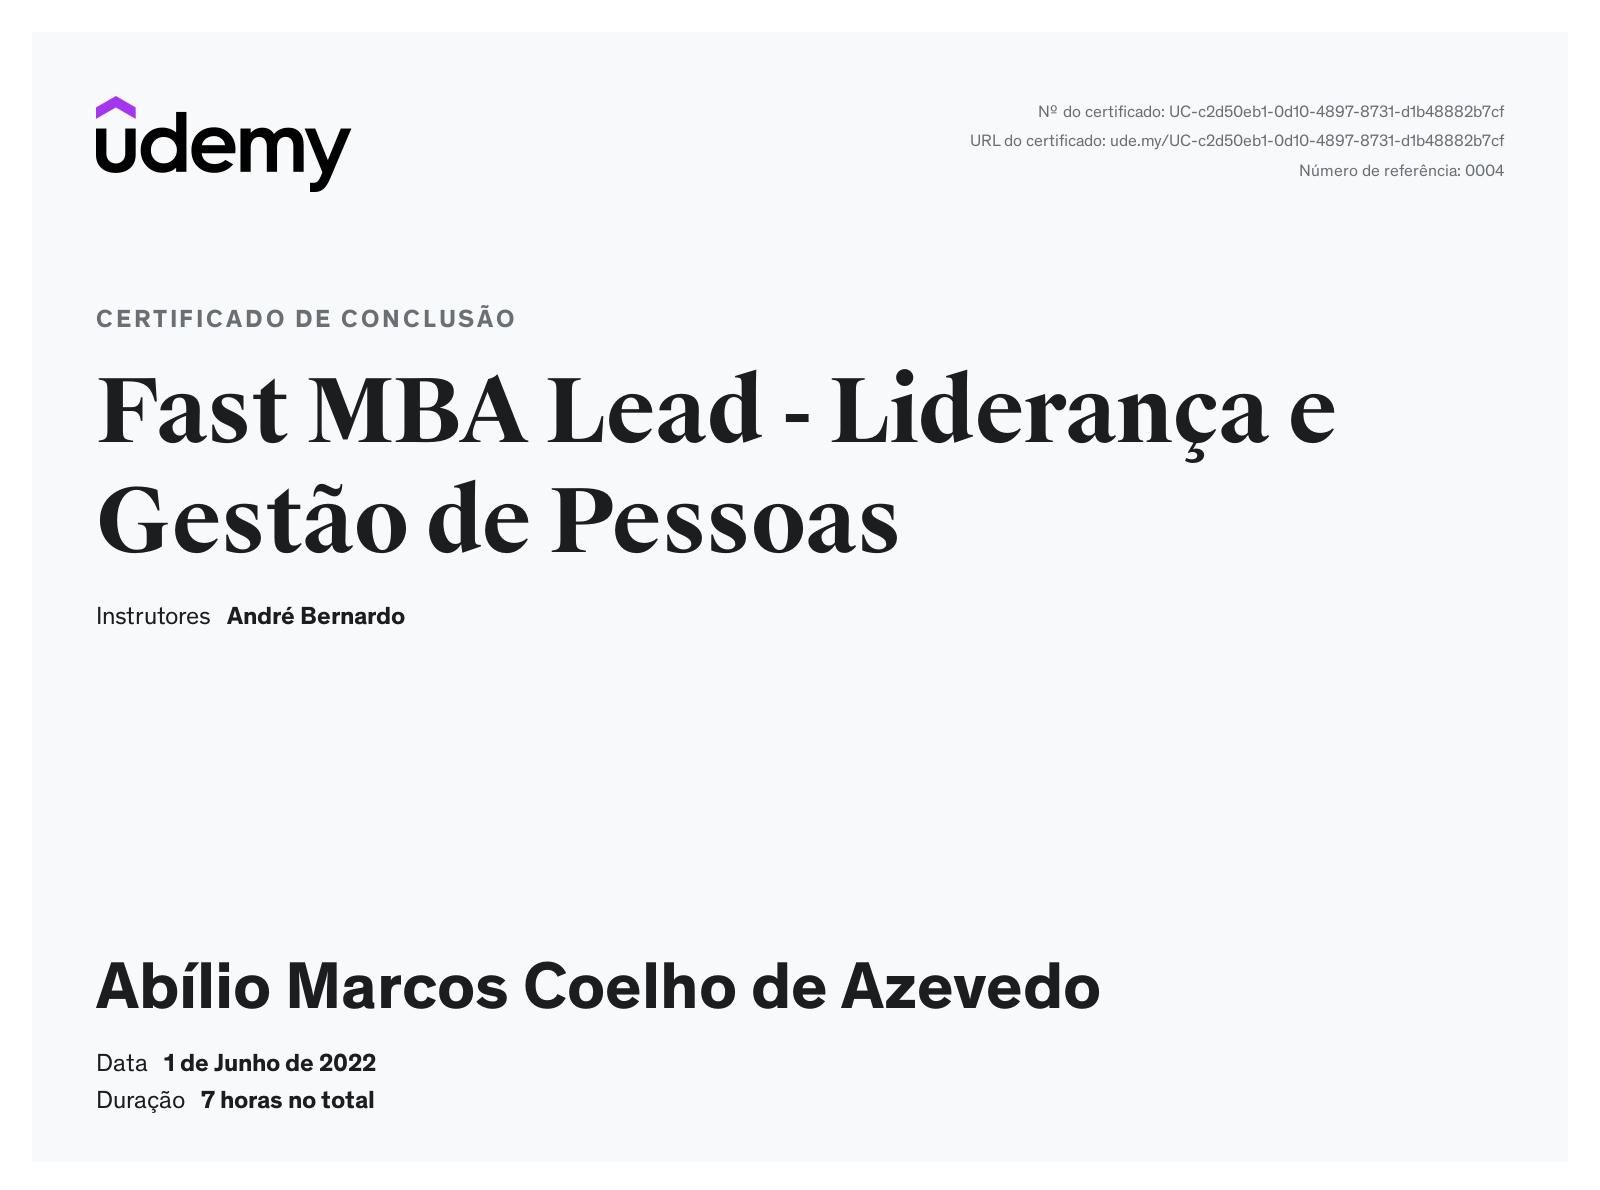 Fast MBA Lead - Leadership and People Management